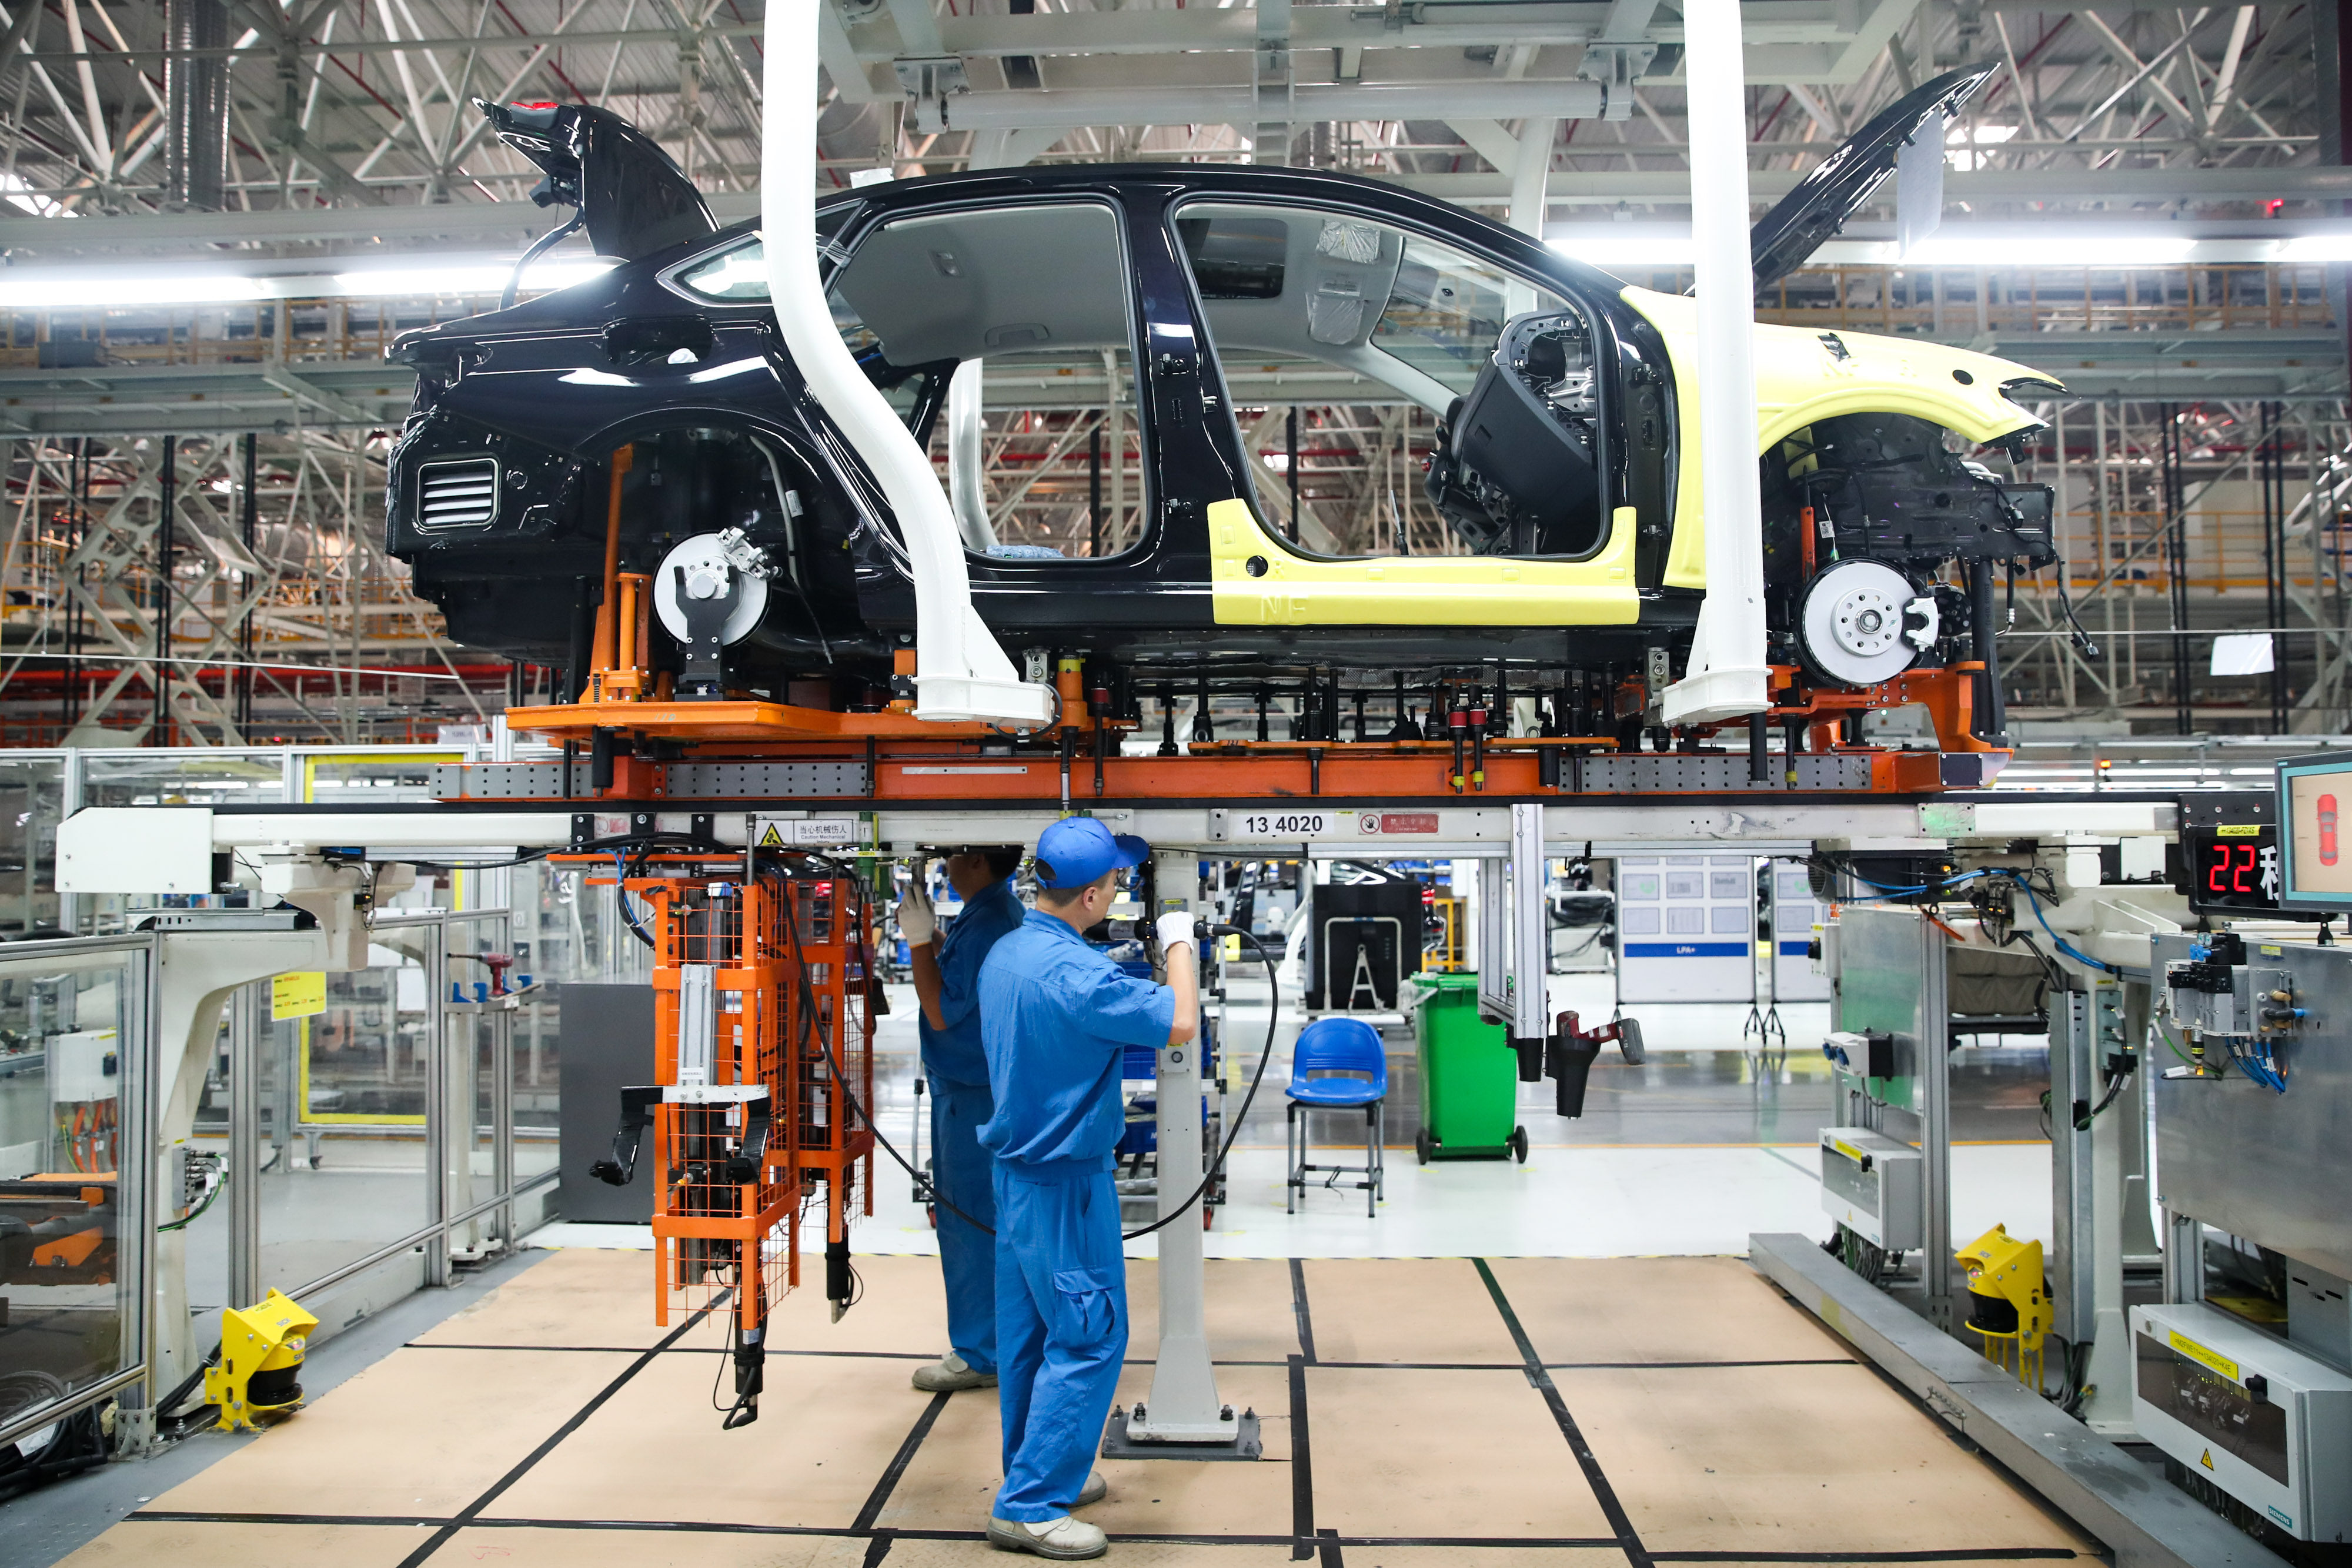 Workers on an assembly line at SAIC-Volkswagen workshop in Shanghai on Oct. 30, 2018. Photo: Xinhua